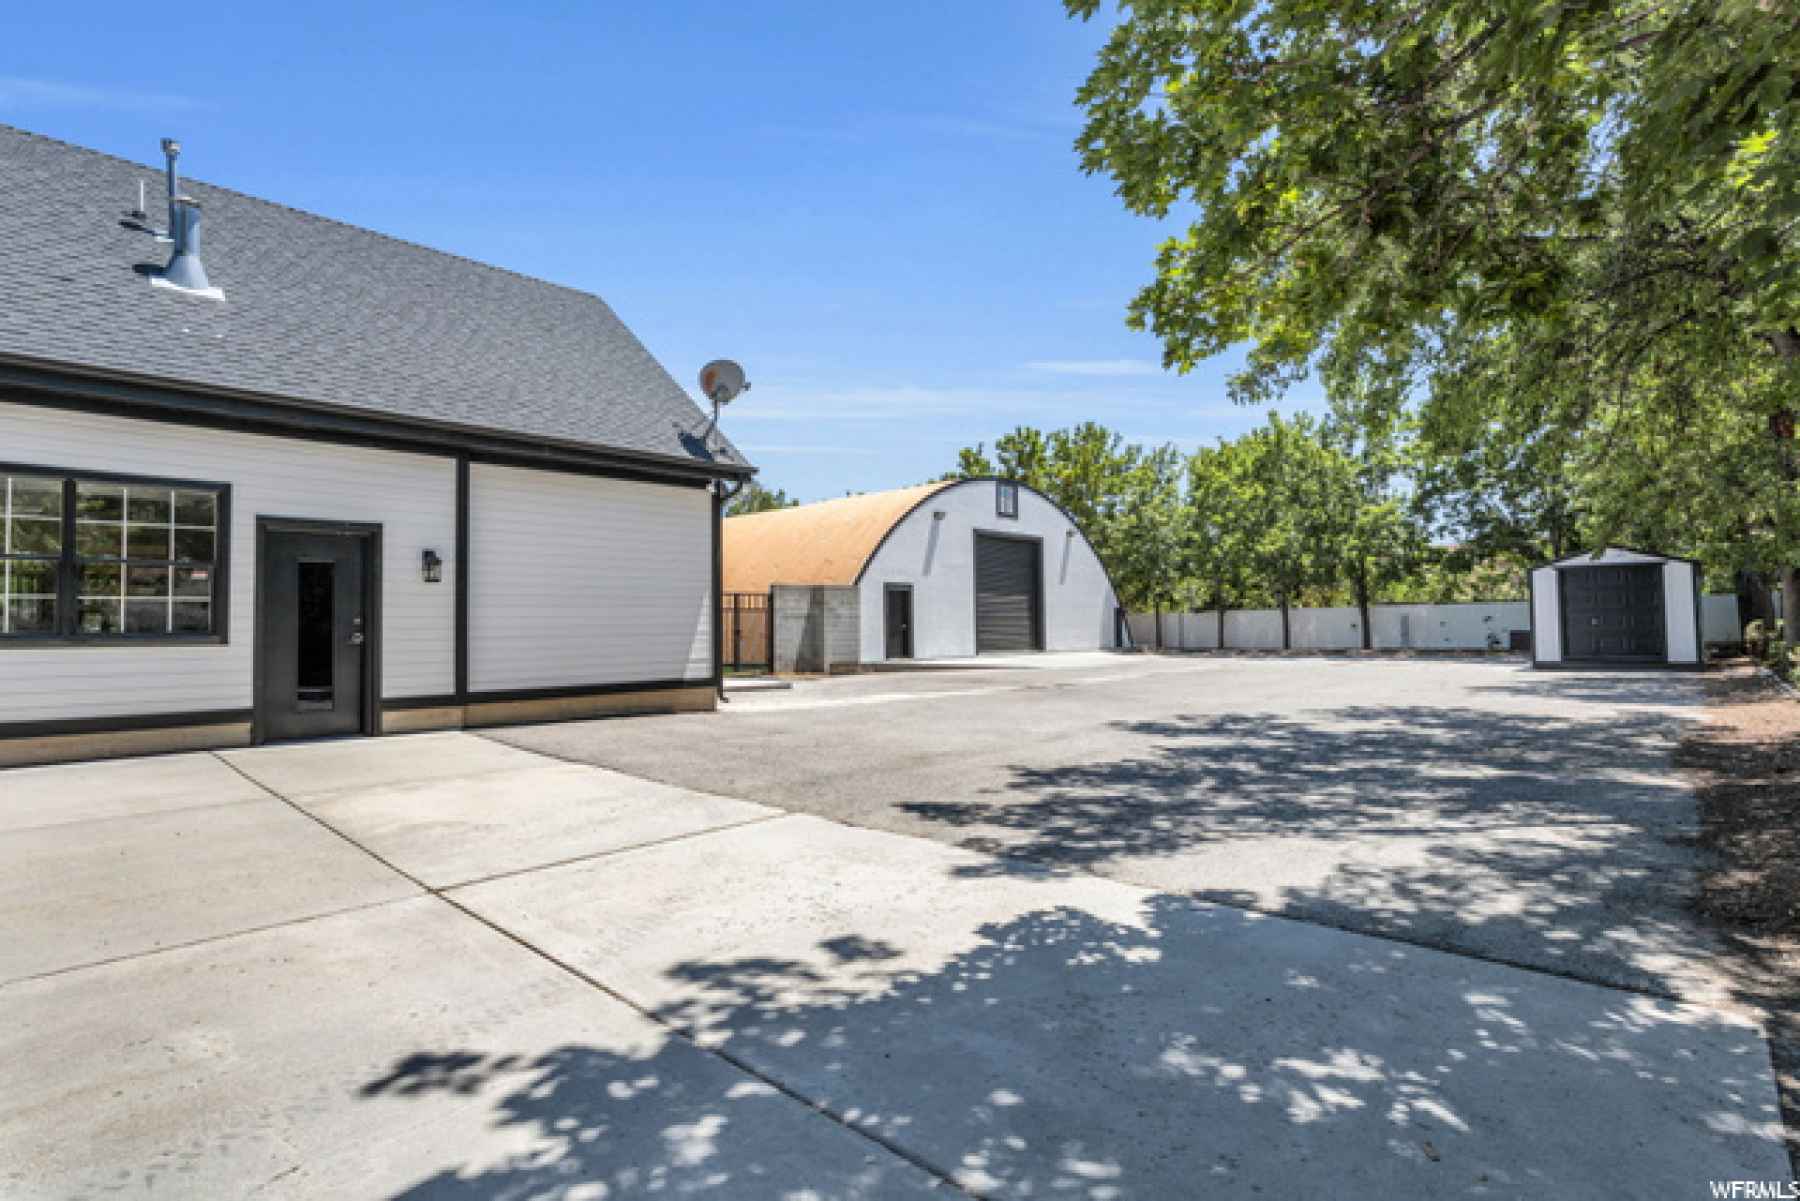 Here you can see the side apartment entrance, the quonset, and between is an entrance to back yard through wrought iron gates. Also views of large, additional storage shed.